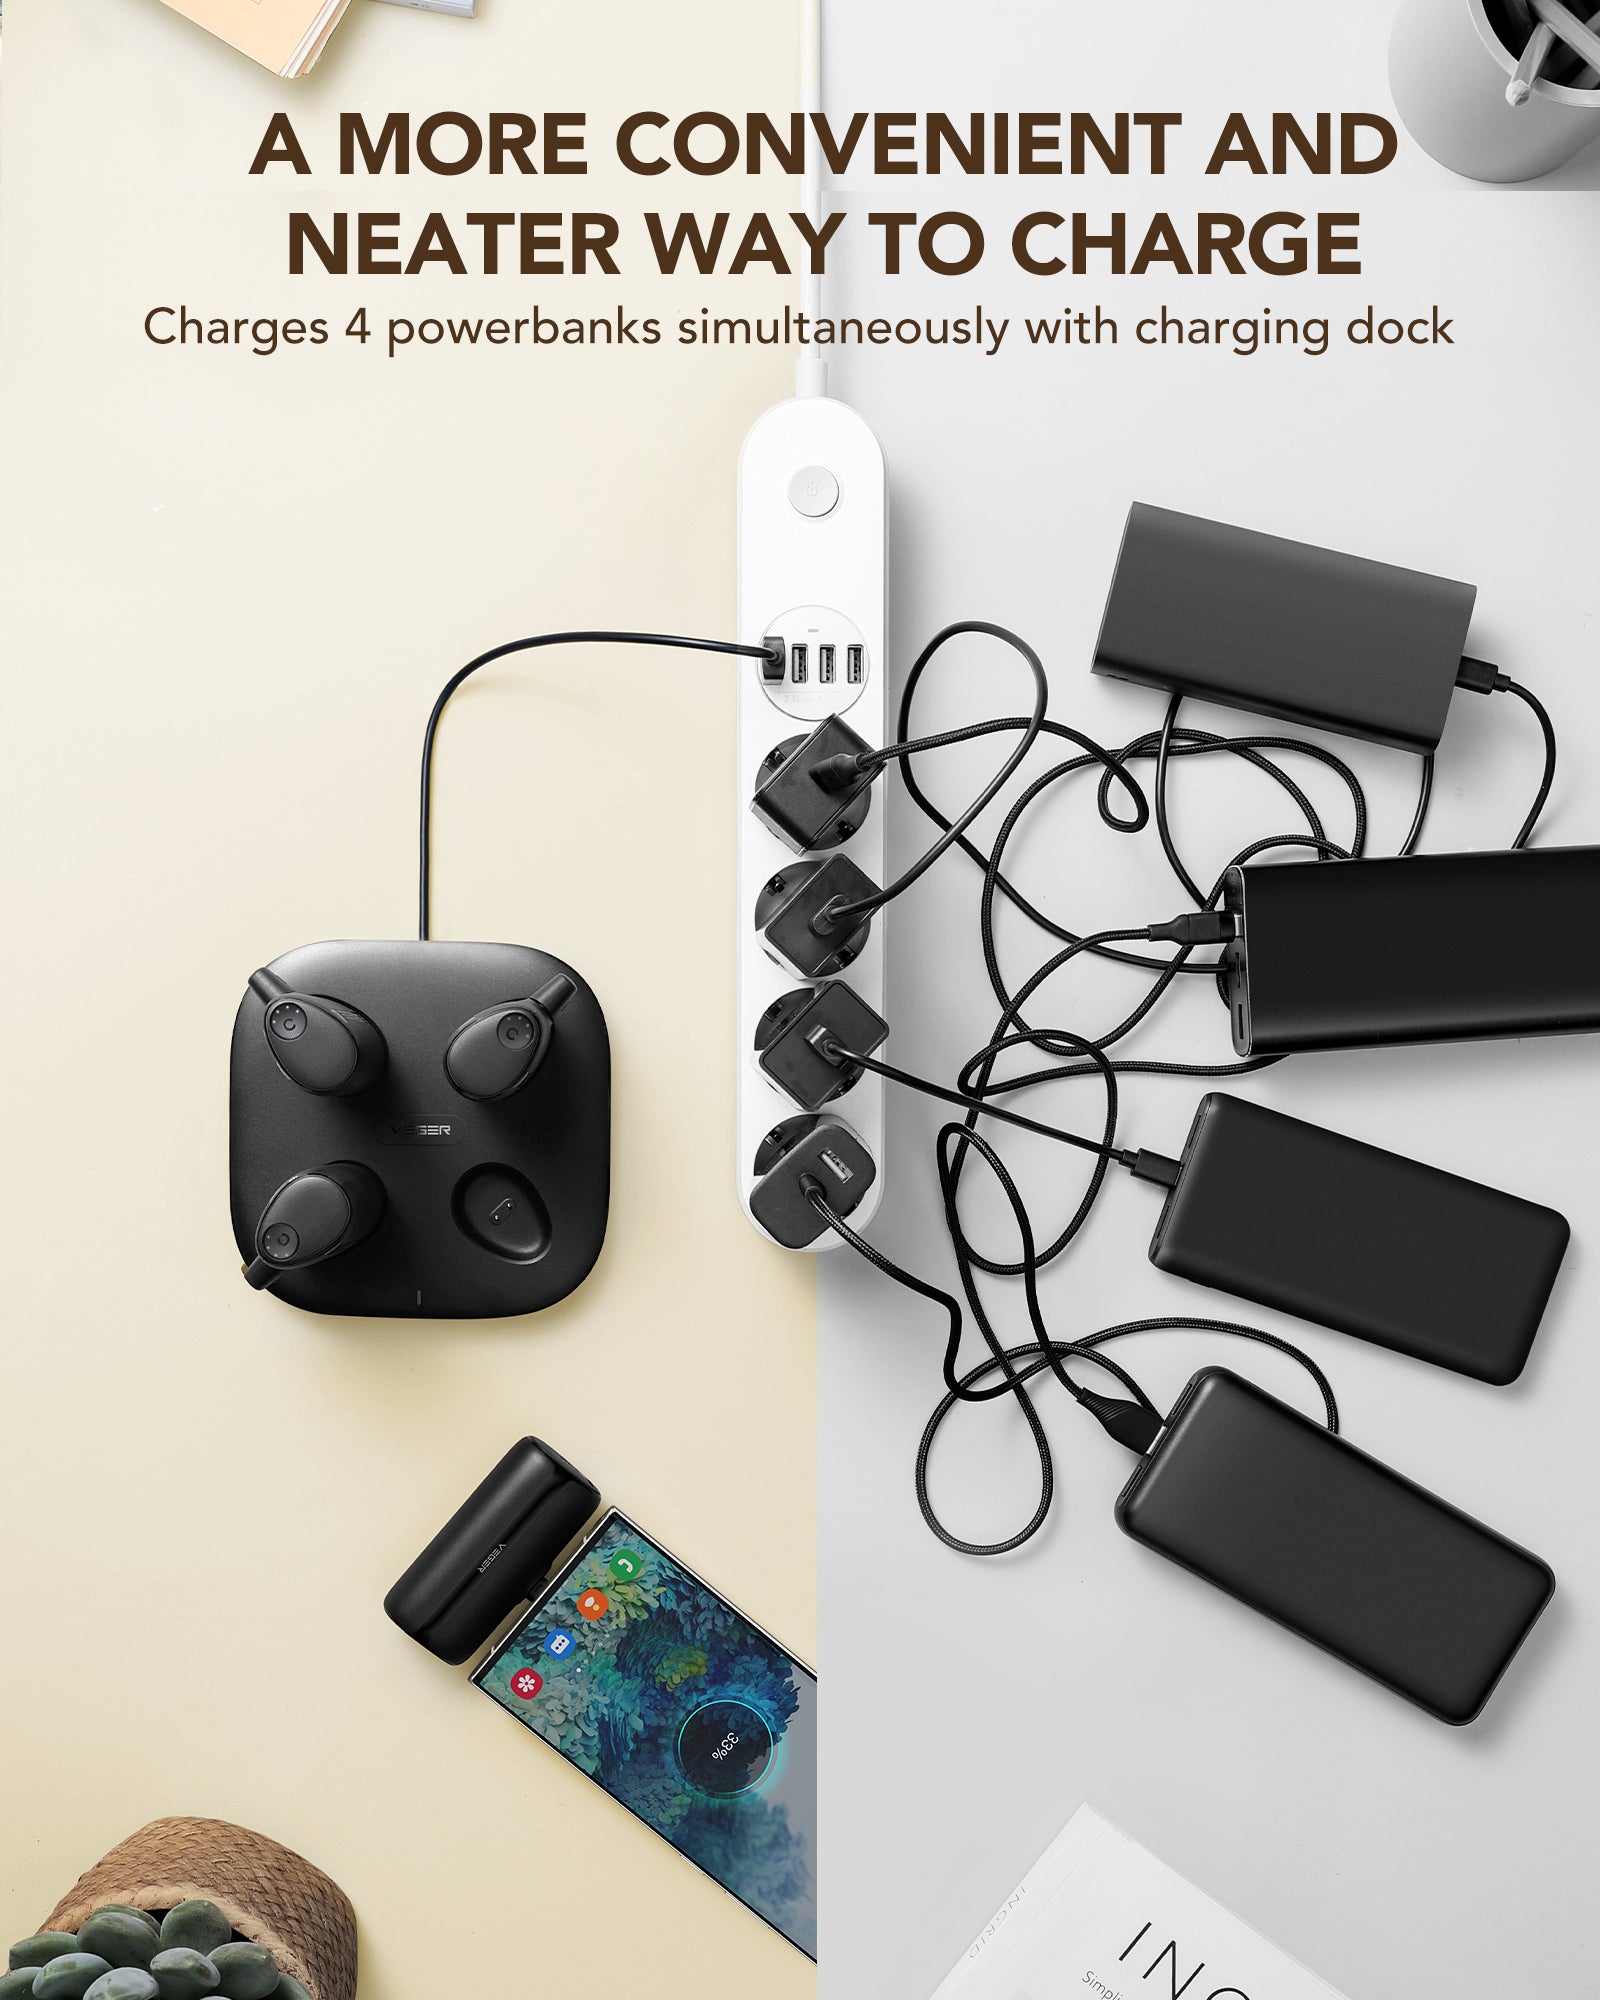 Cordless Mini Hybrid Type-C Charging Station Power Banks, 5000mAh 20W PD Fast Charging with Built-in Connectors